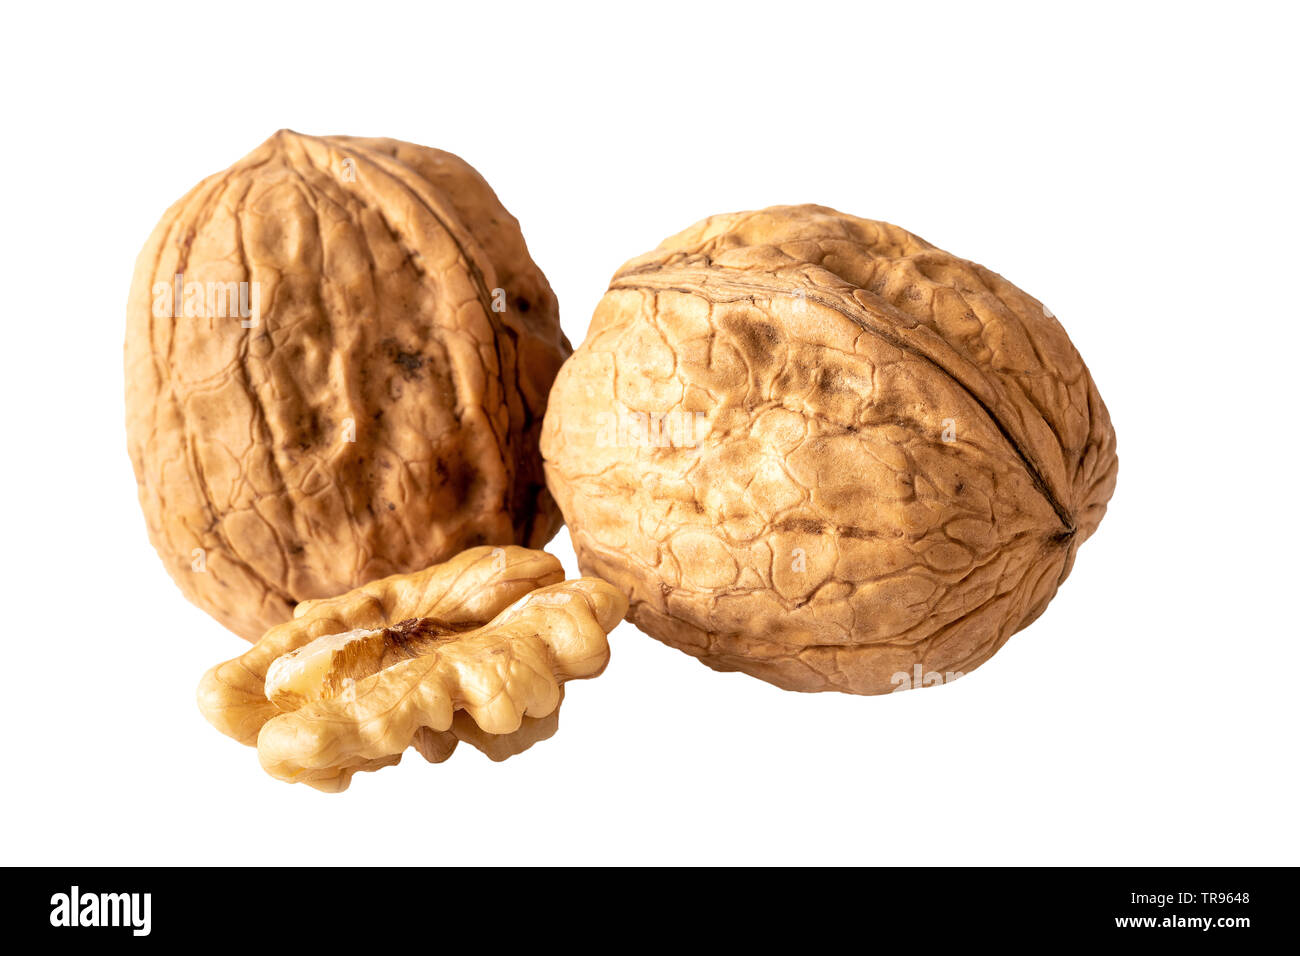 two unshelled walnuts and walnut halve isolated on white Stock Photo